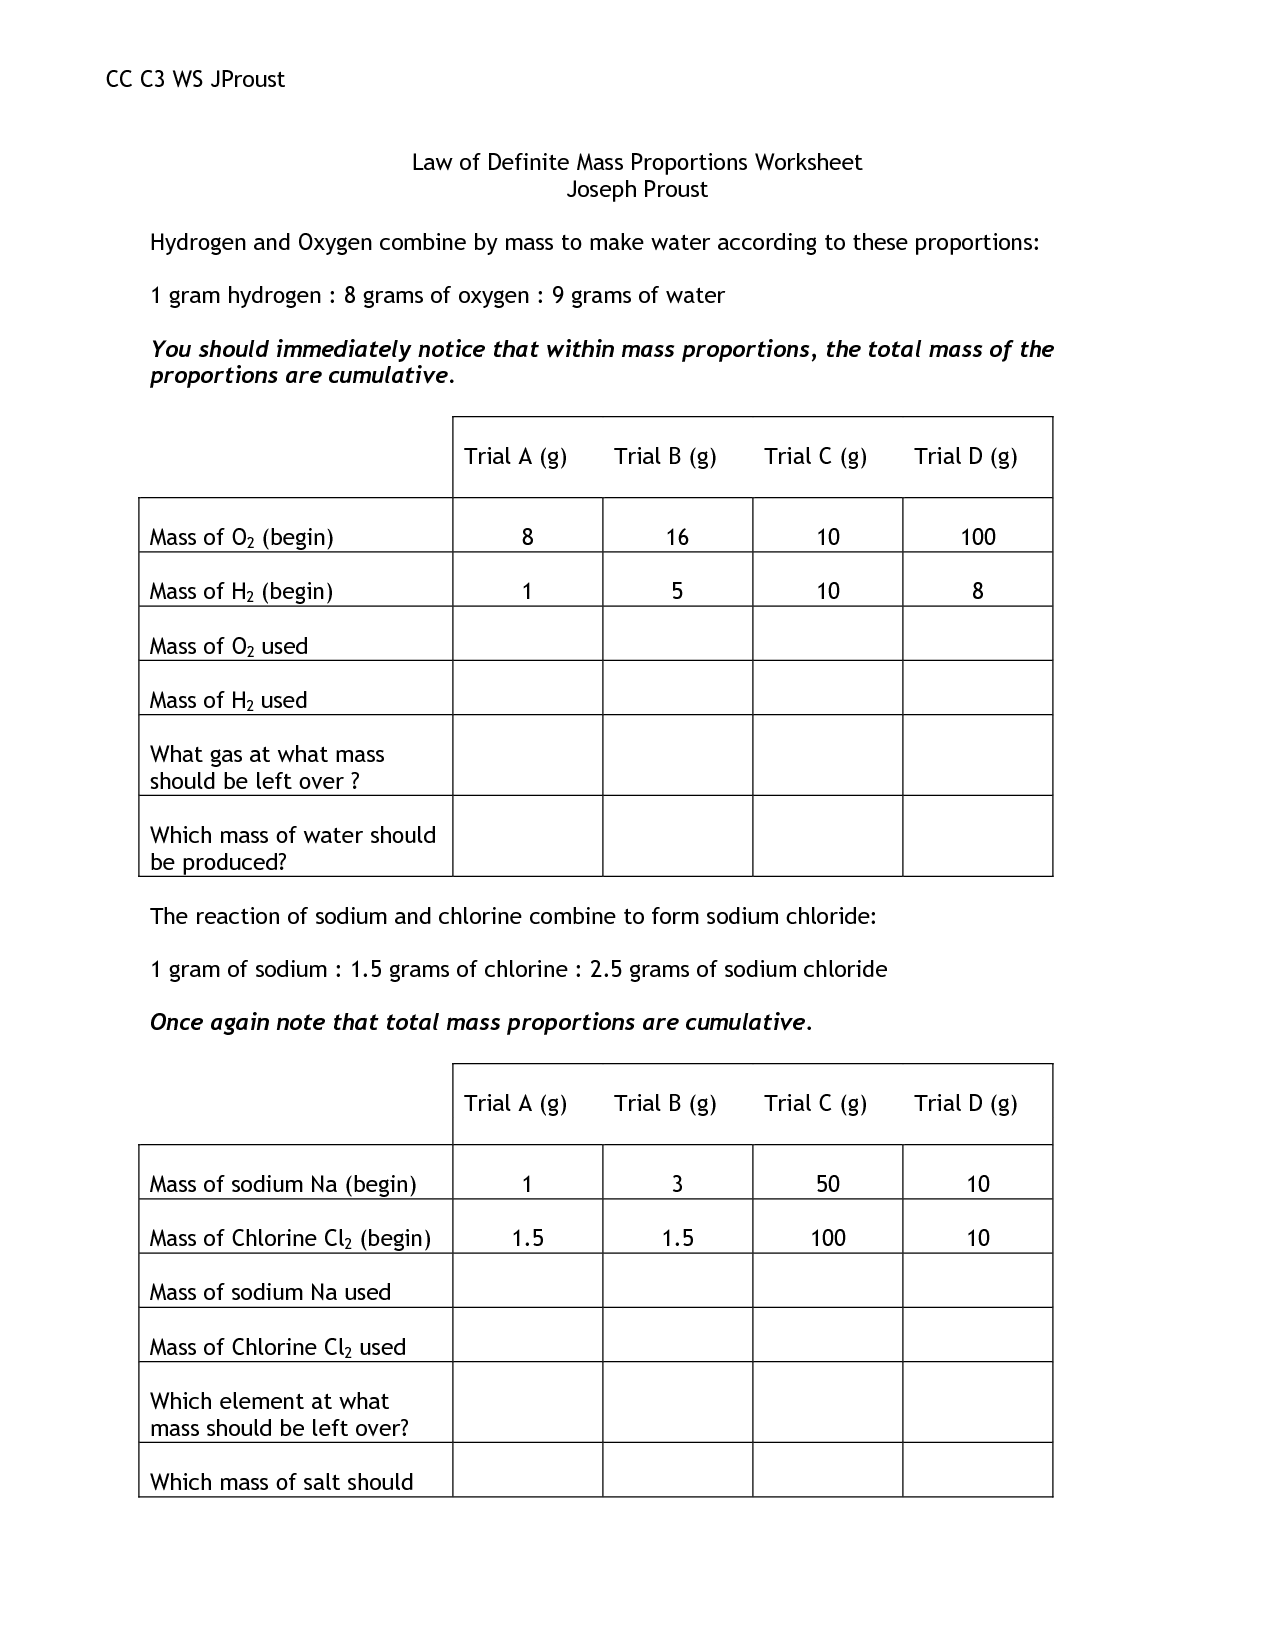 Mass Law of Definite Proportion Worksheets Image